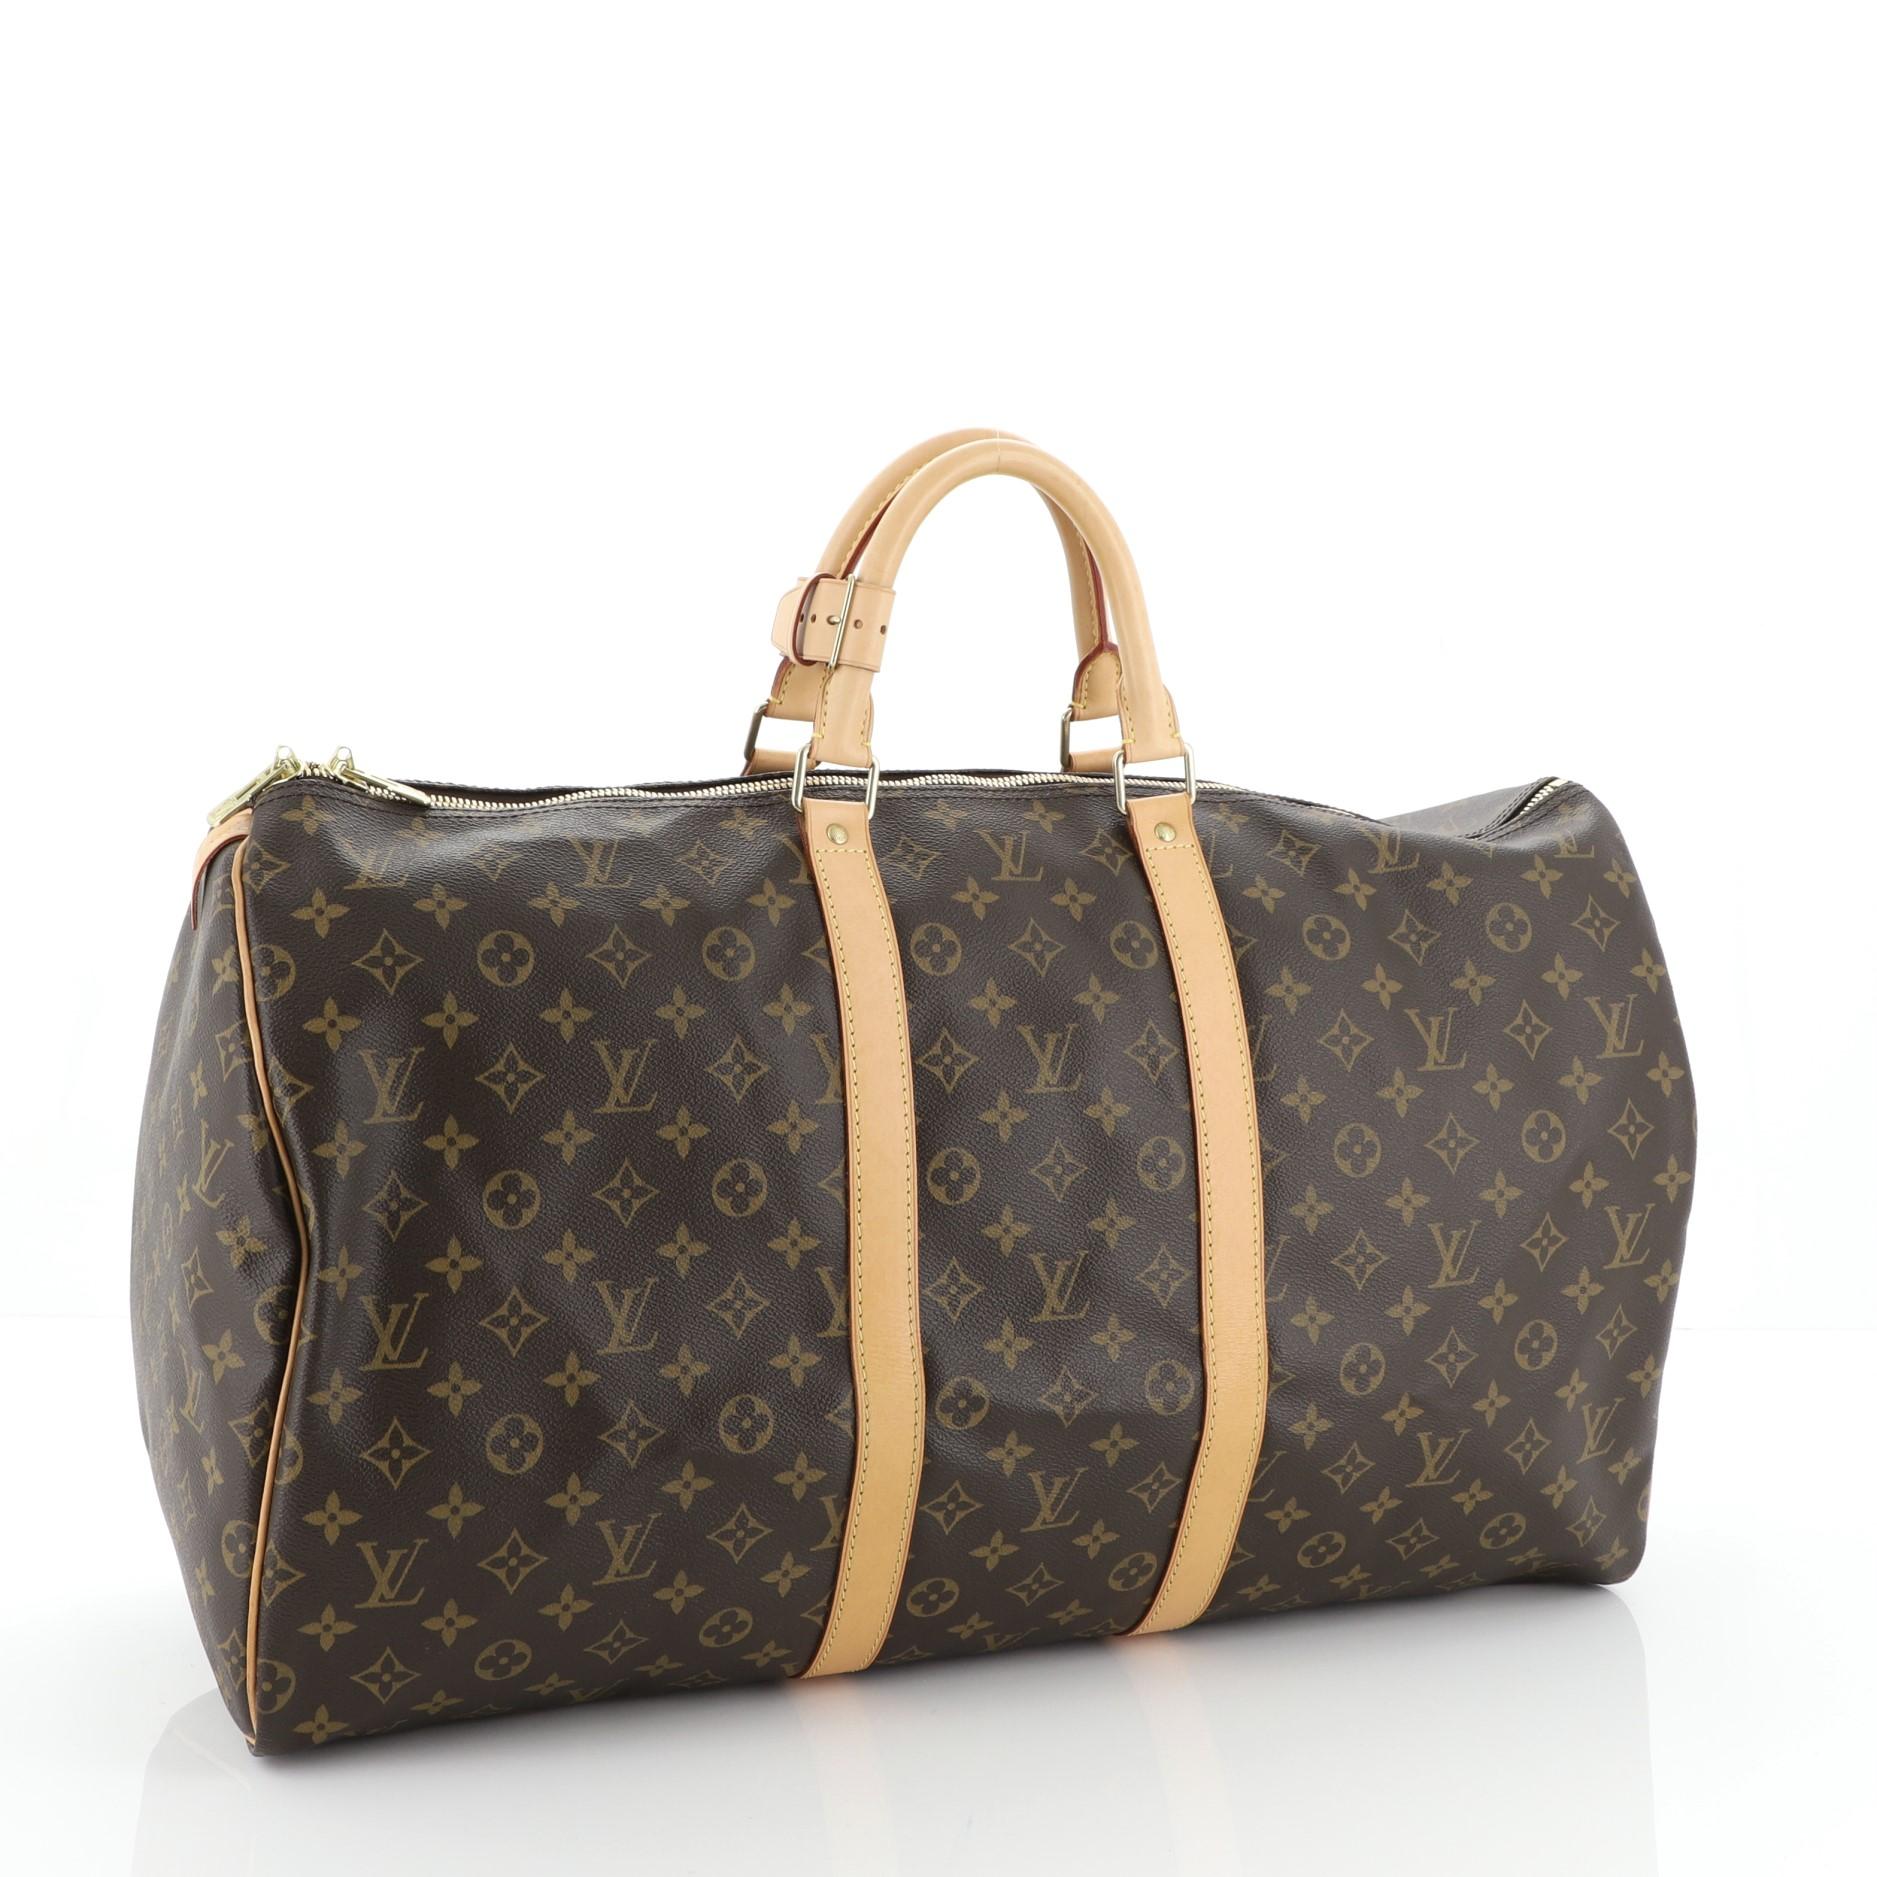 This Louis Vuitton Keepall Bag Monogram Canvas 55, crafted in brown monogram coated canvas, features dual rolled leather handles, vachetta leather trim, and gold-tone hardware. Its two-way zip closure opens to a brown fabric interior. Authenticity